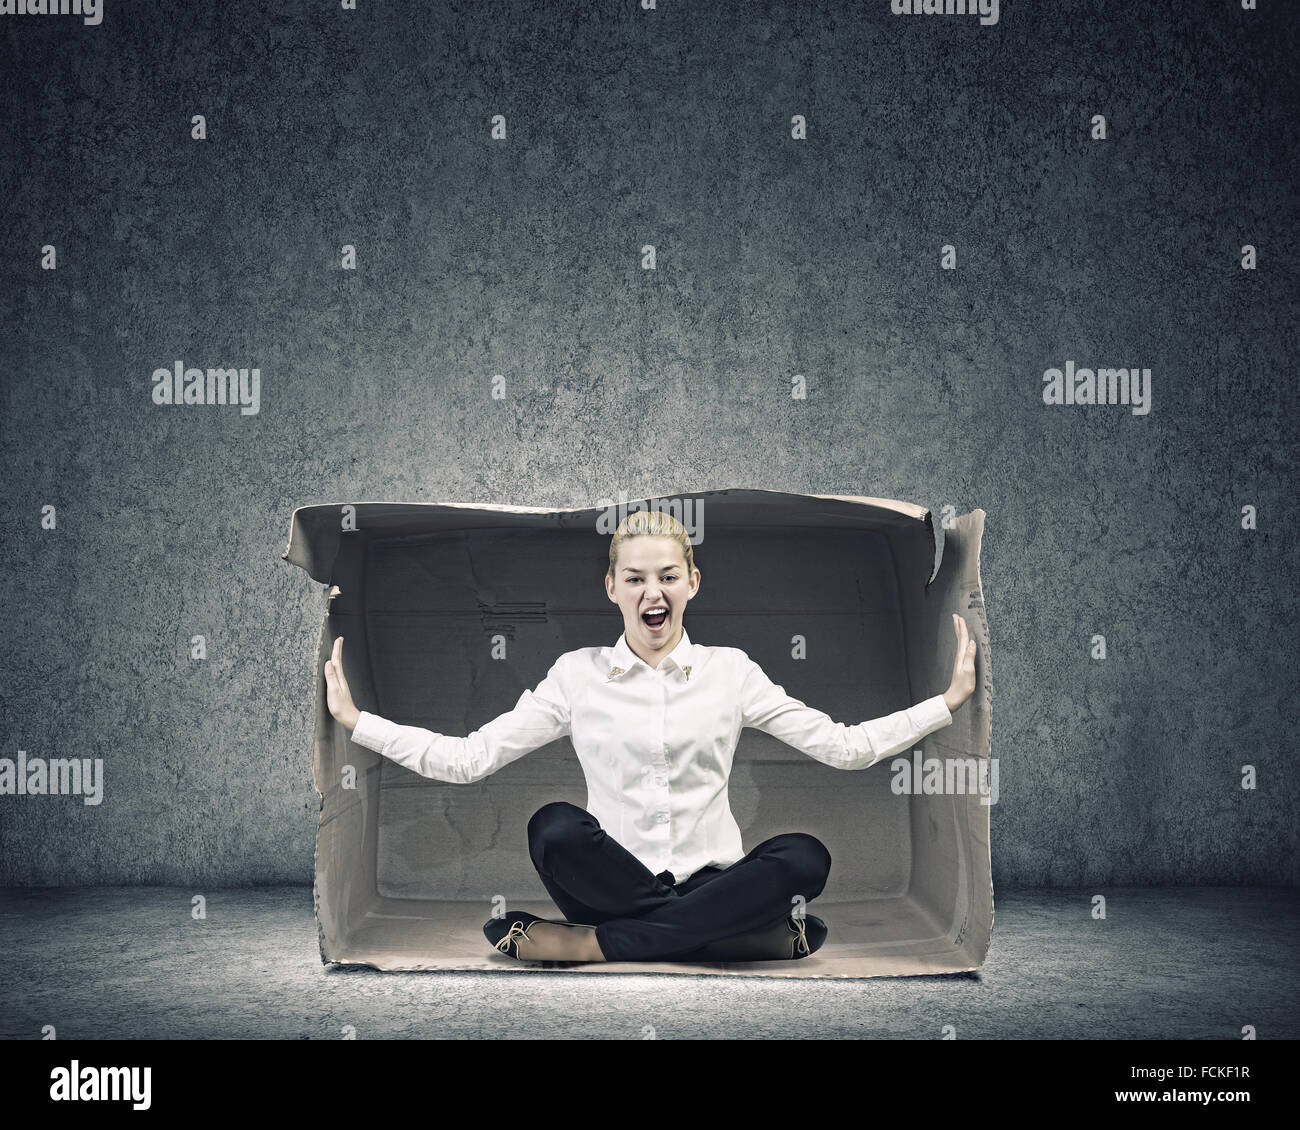 Collection 97+ Images woman trapped in a box for 7 years Stunning